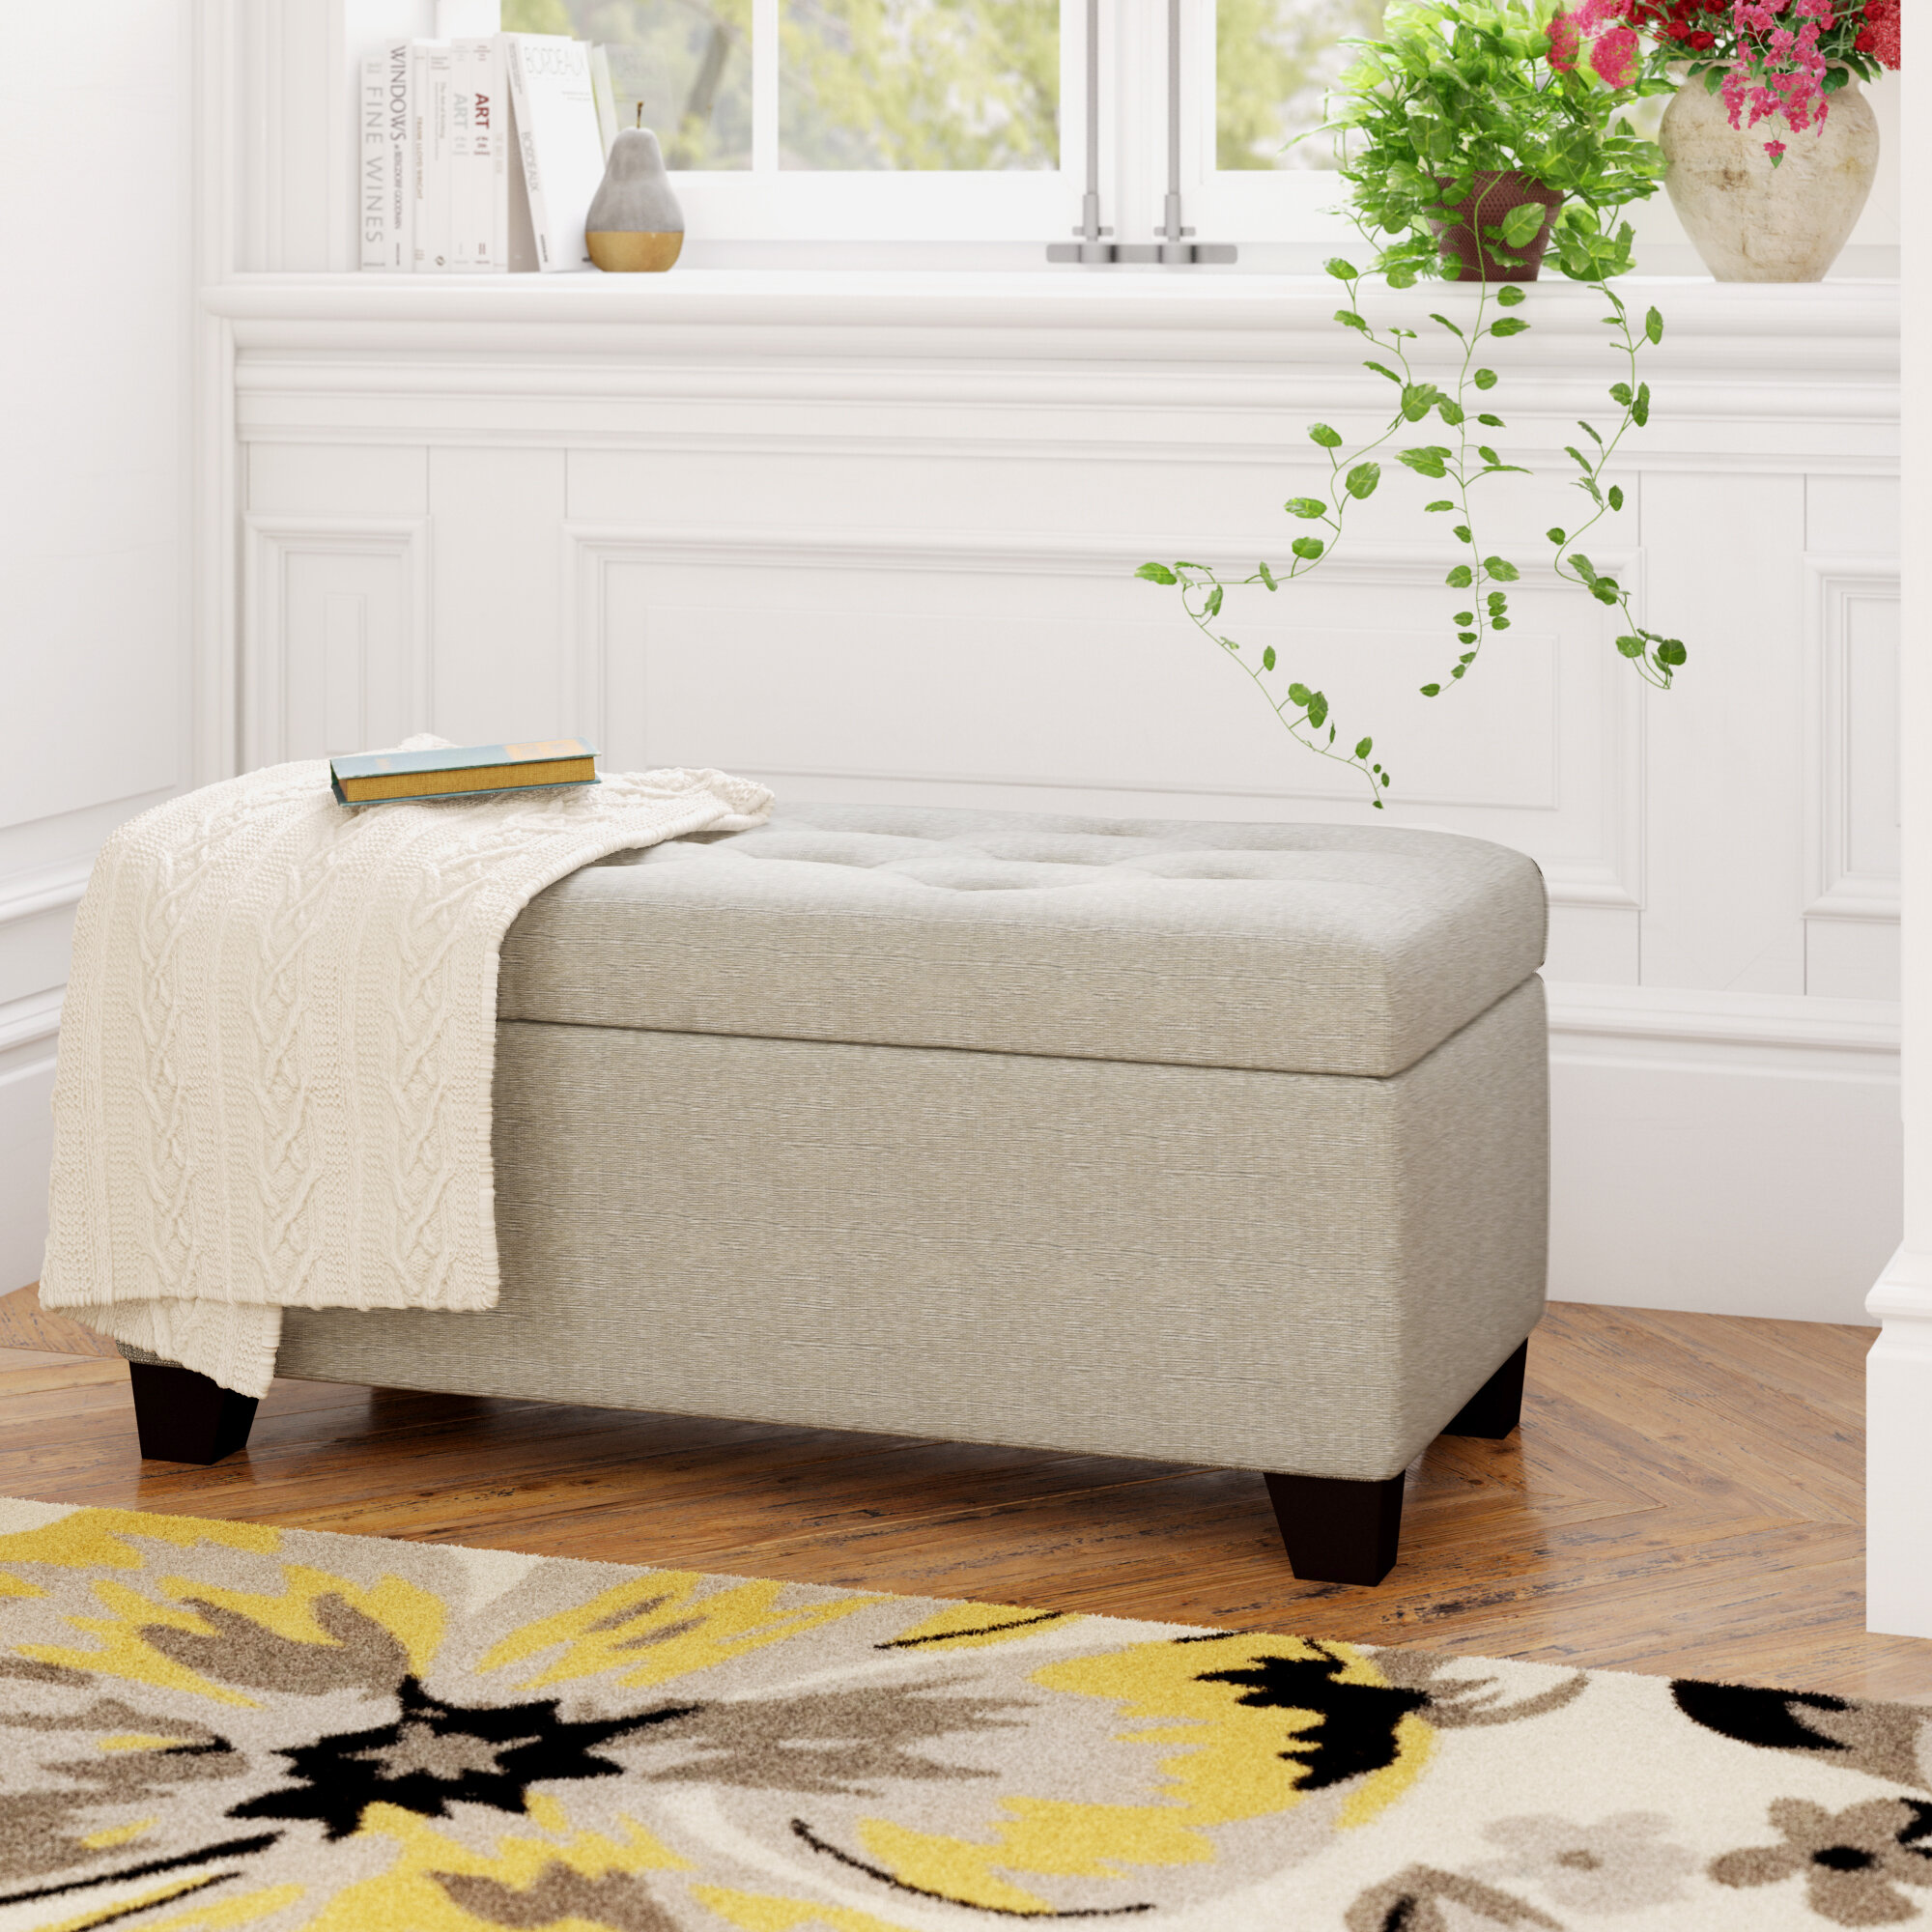 Large Top Quality Ottoman Storage Box & 2 Seater in Chennile Fabric 